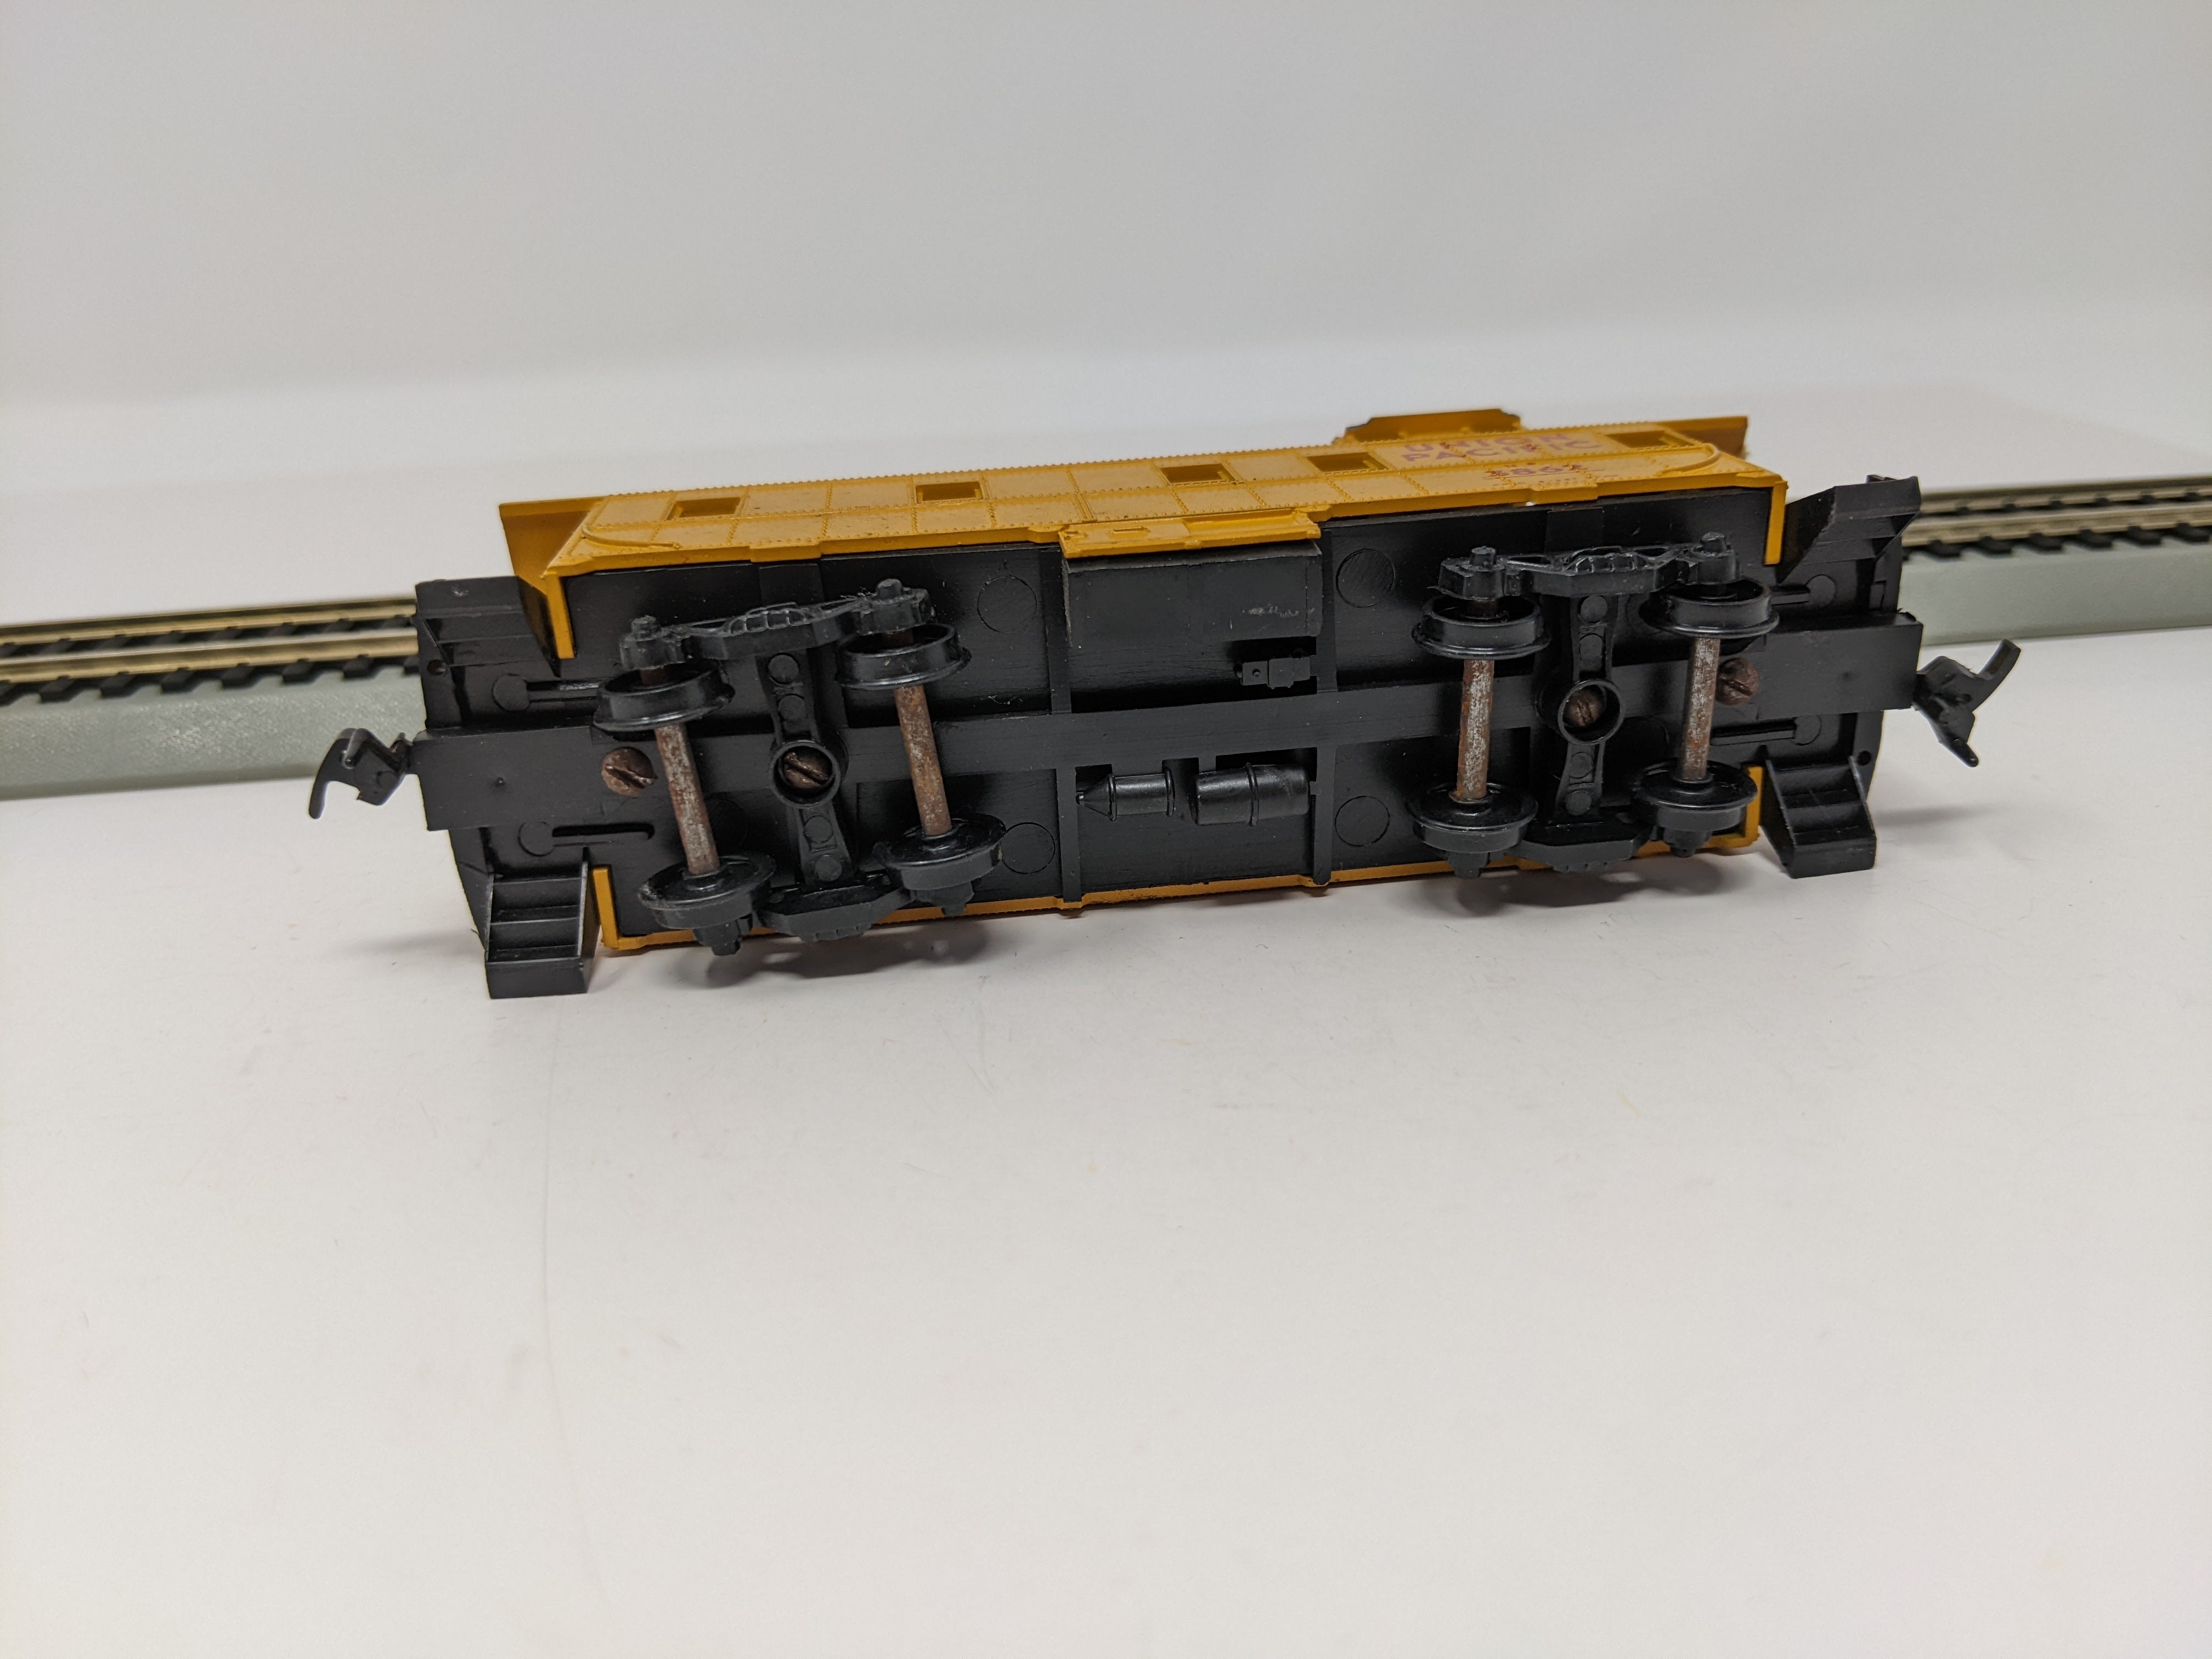 USED Athearn HO Scale, Caboose, Union Pacific UP #3862, Missing Parts